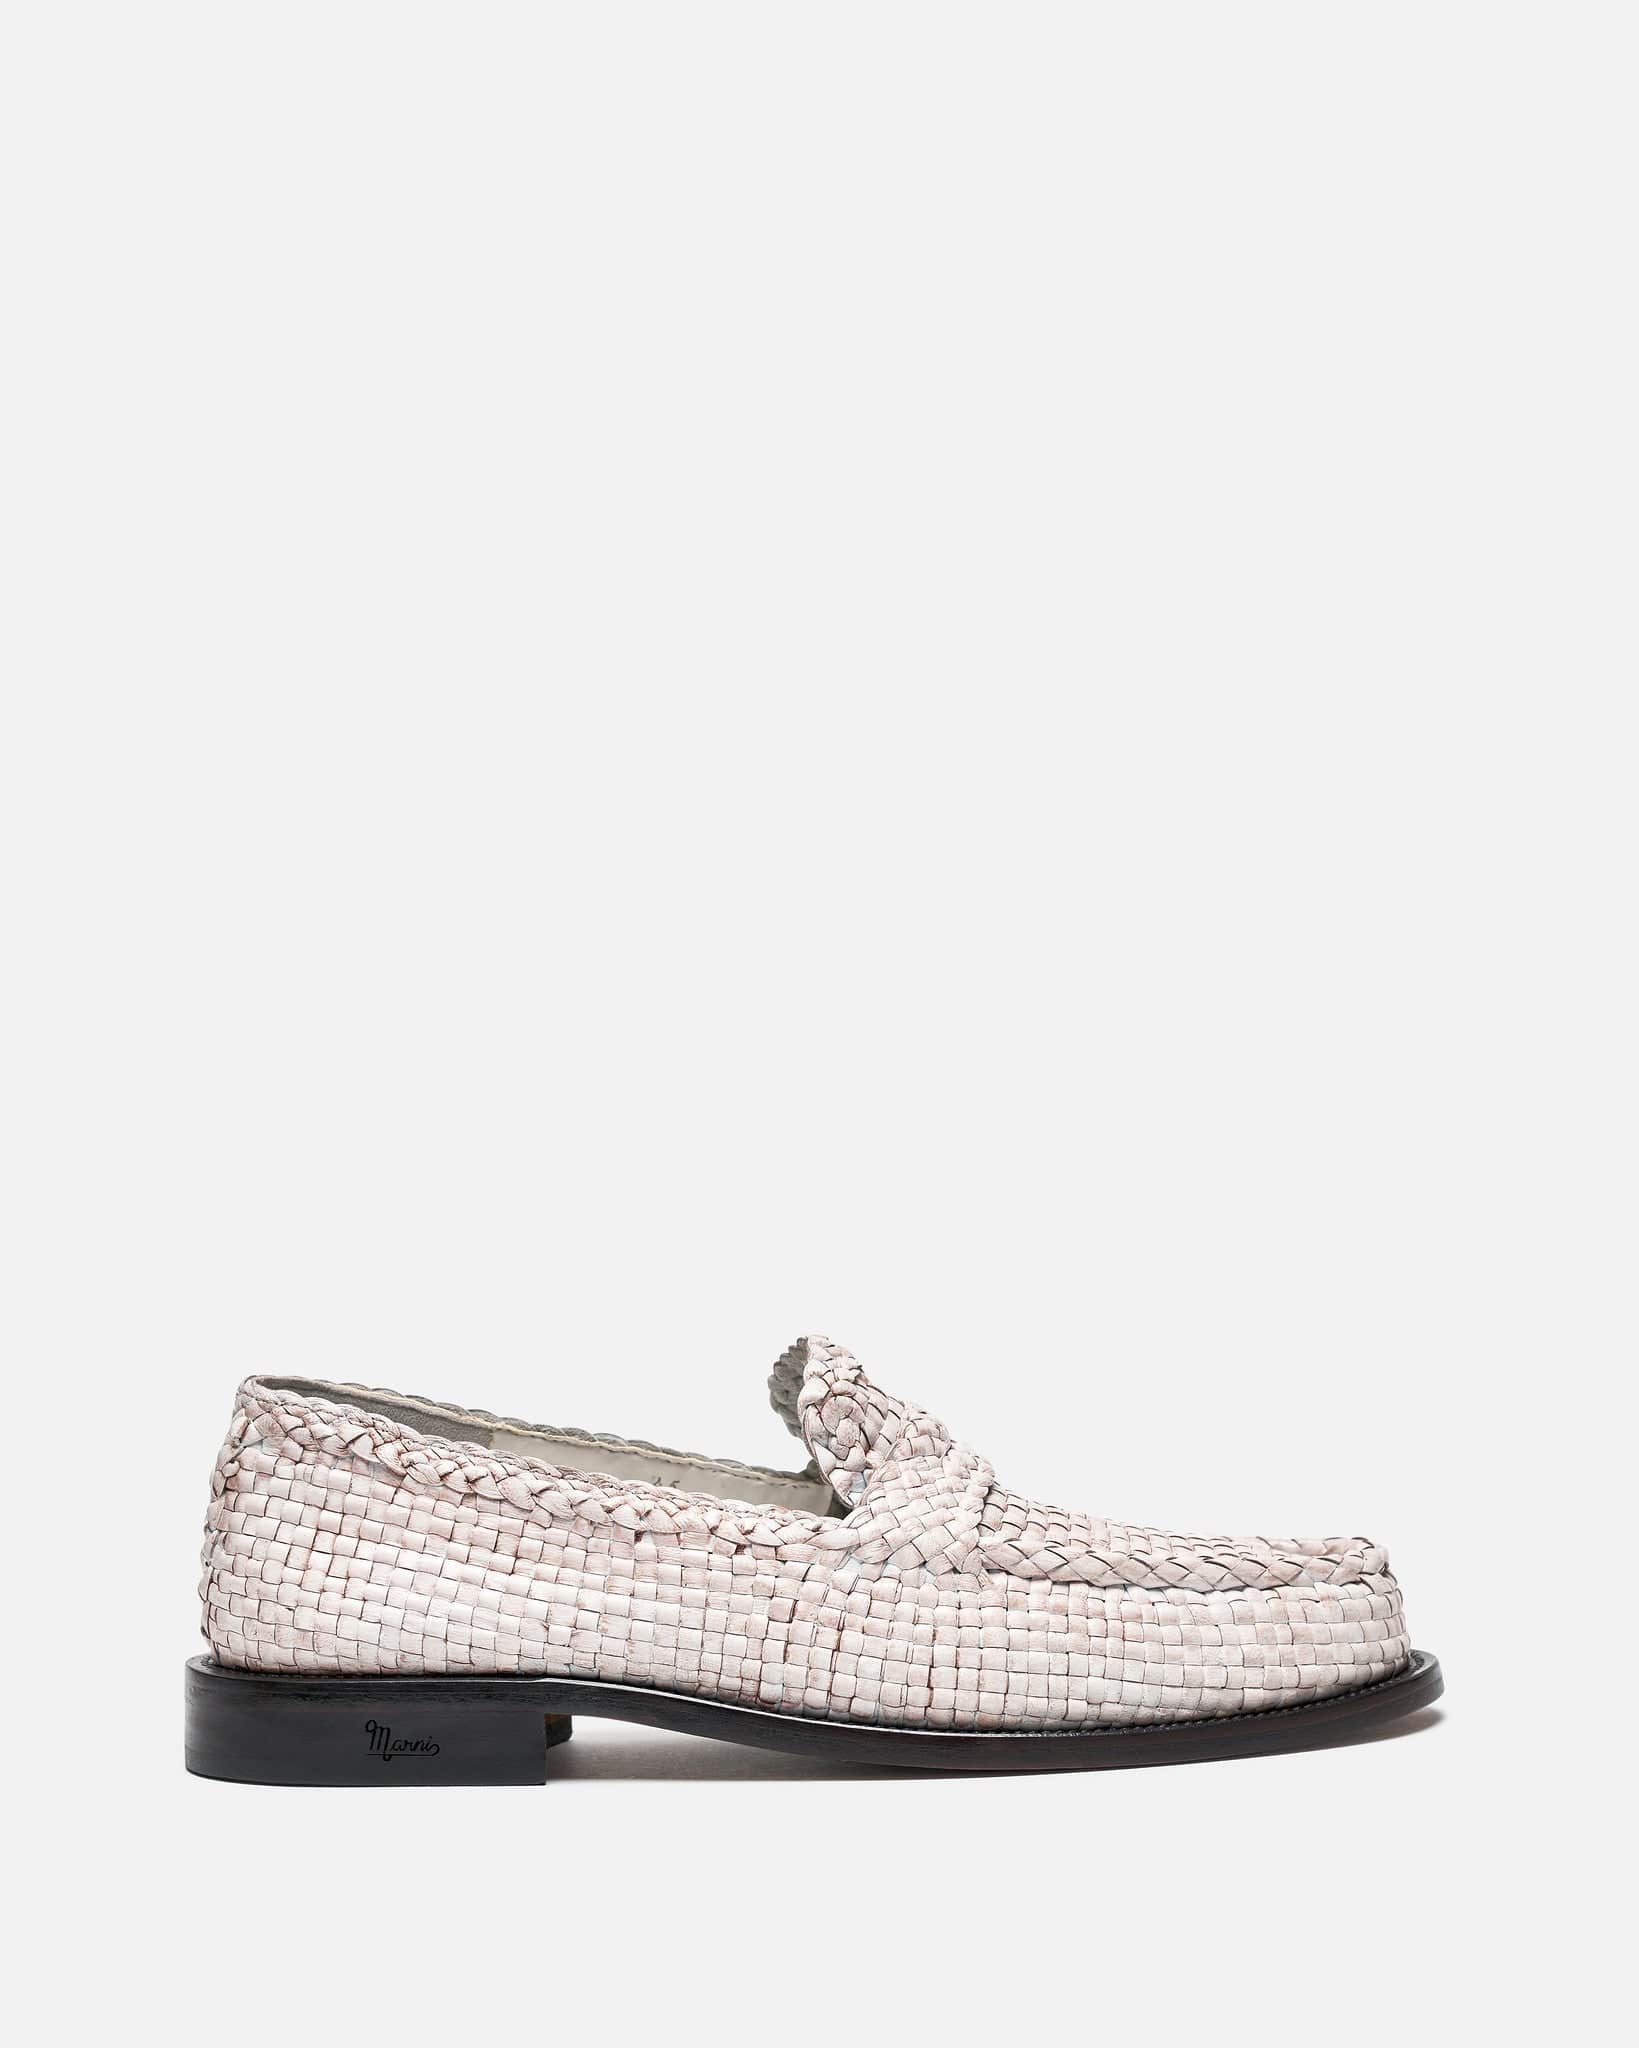 Light Woven Leather Loom Moccasin in Lily White